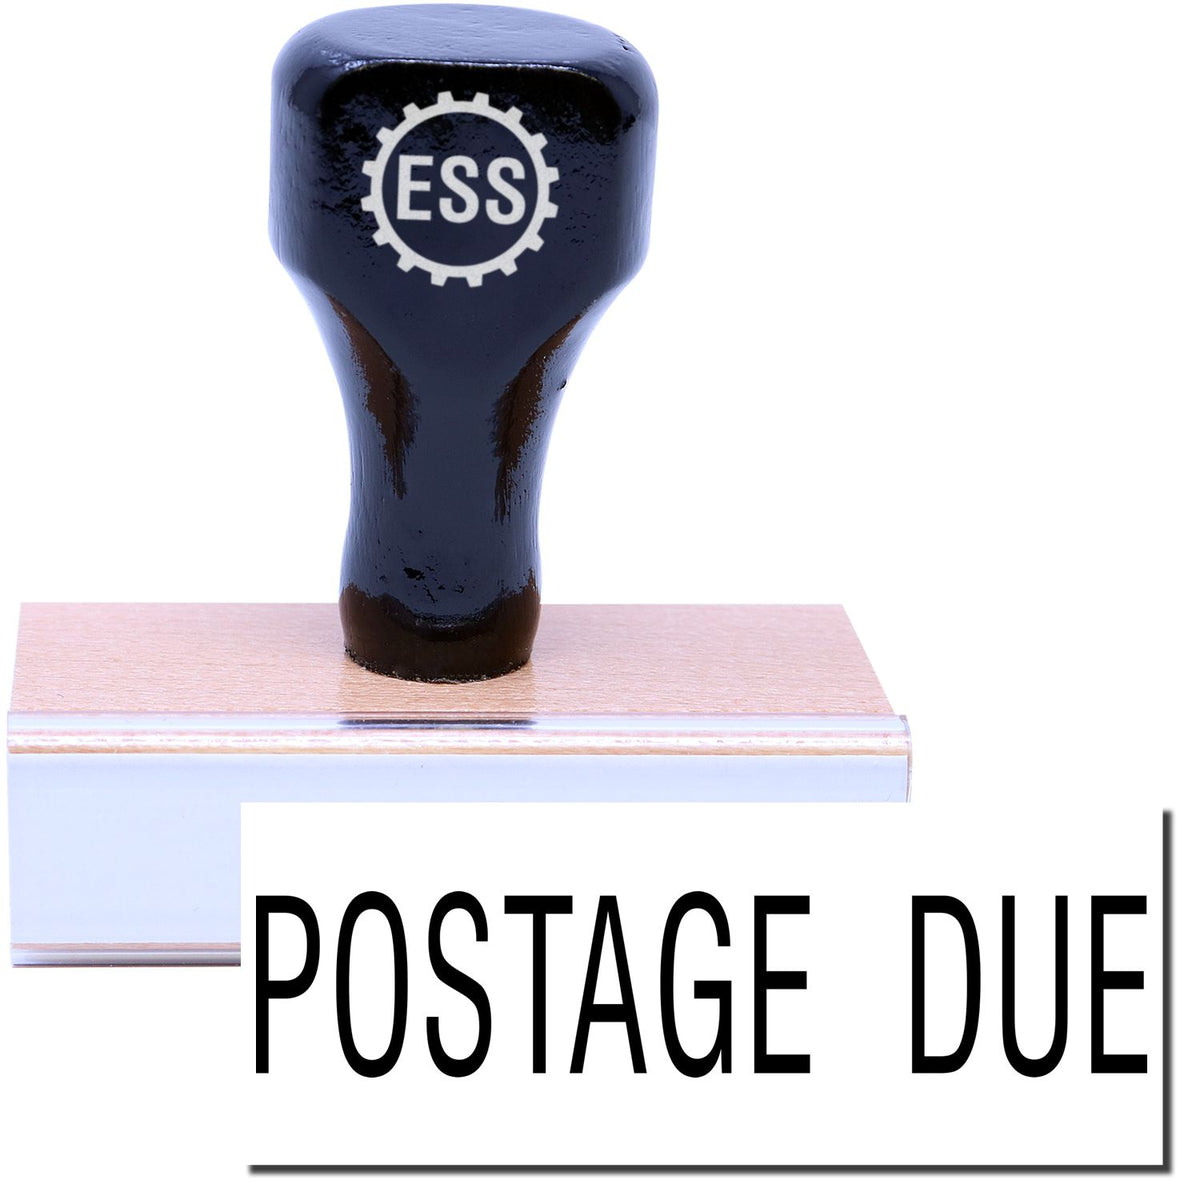 A stock office rubber stamp with a stamped image showing how the text &quot;POSTAGE DUE&quot; in a large font is displayed after stamping.